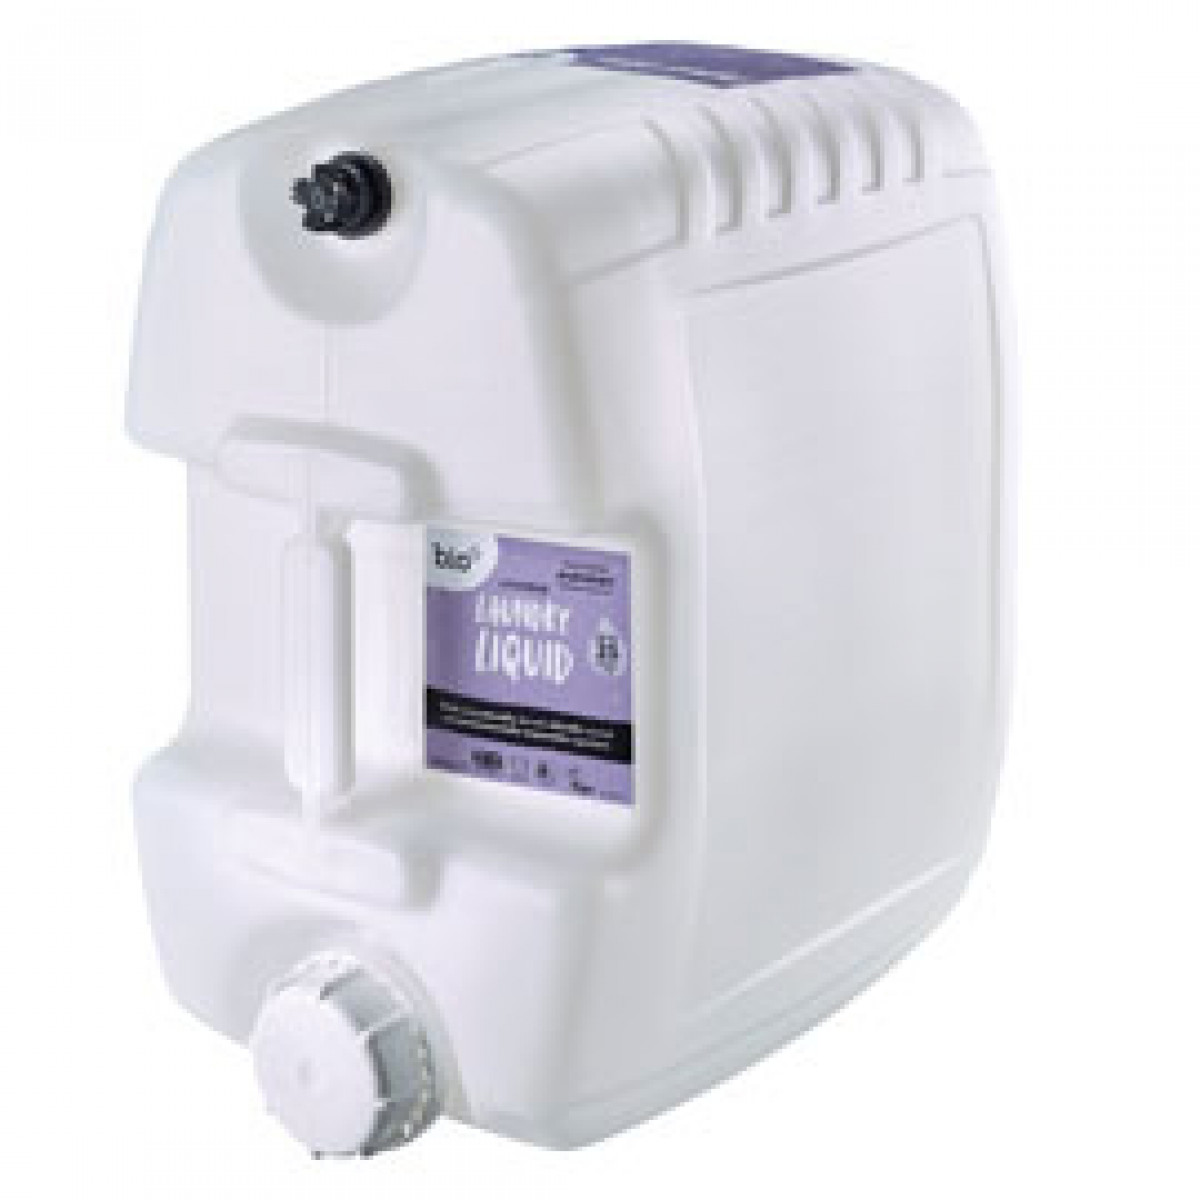 Product picture for Lavender Laundry Liquid - Tap or Pump Required